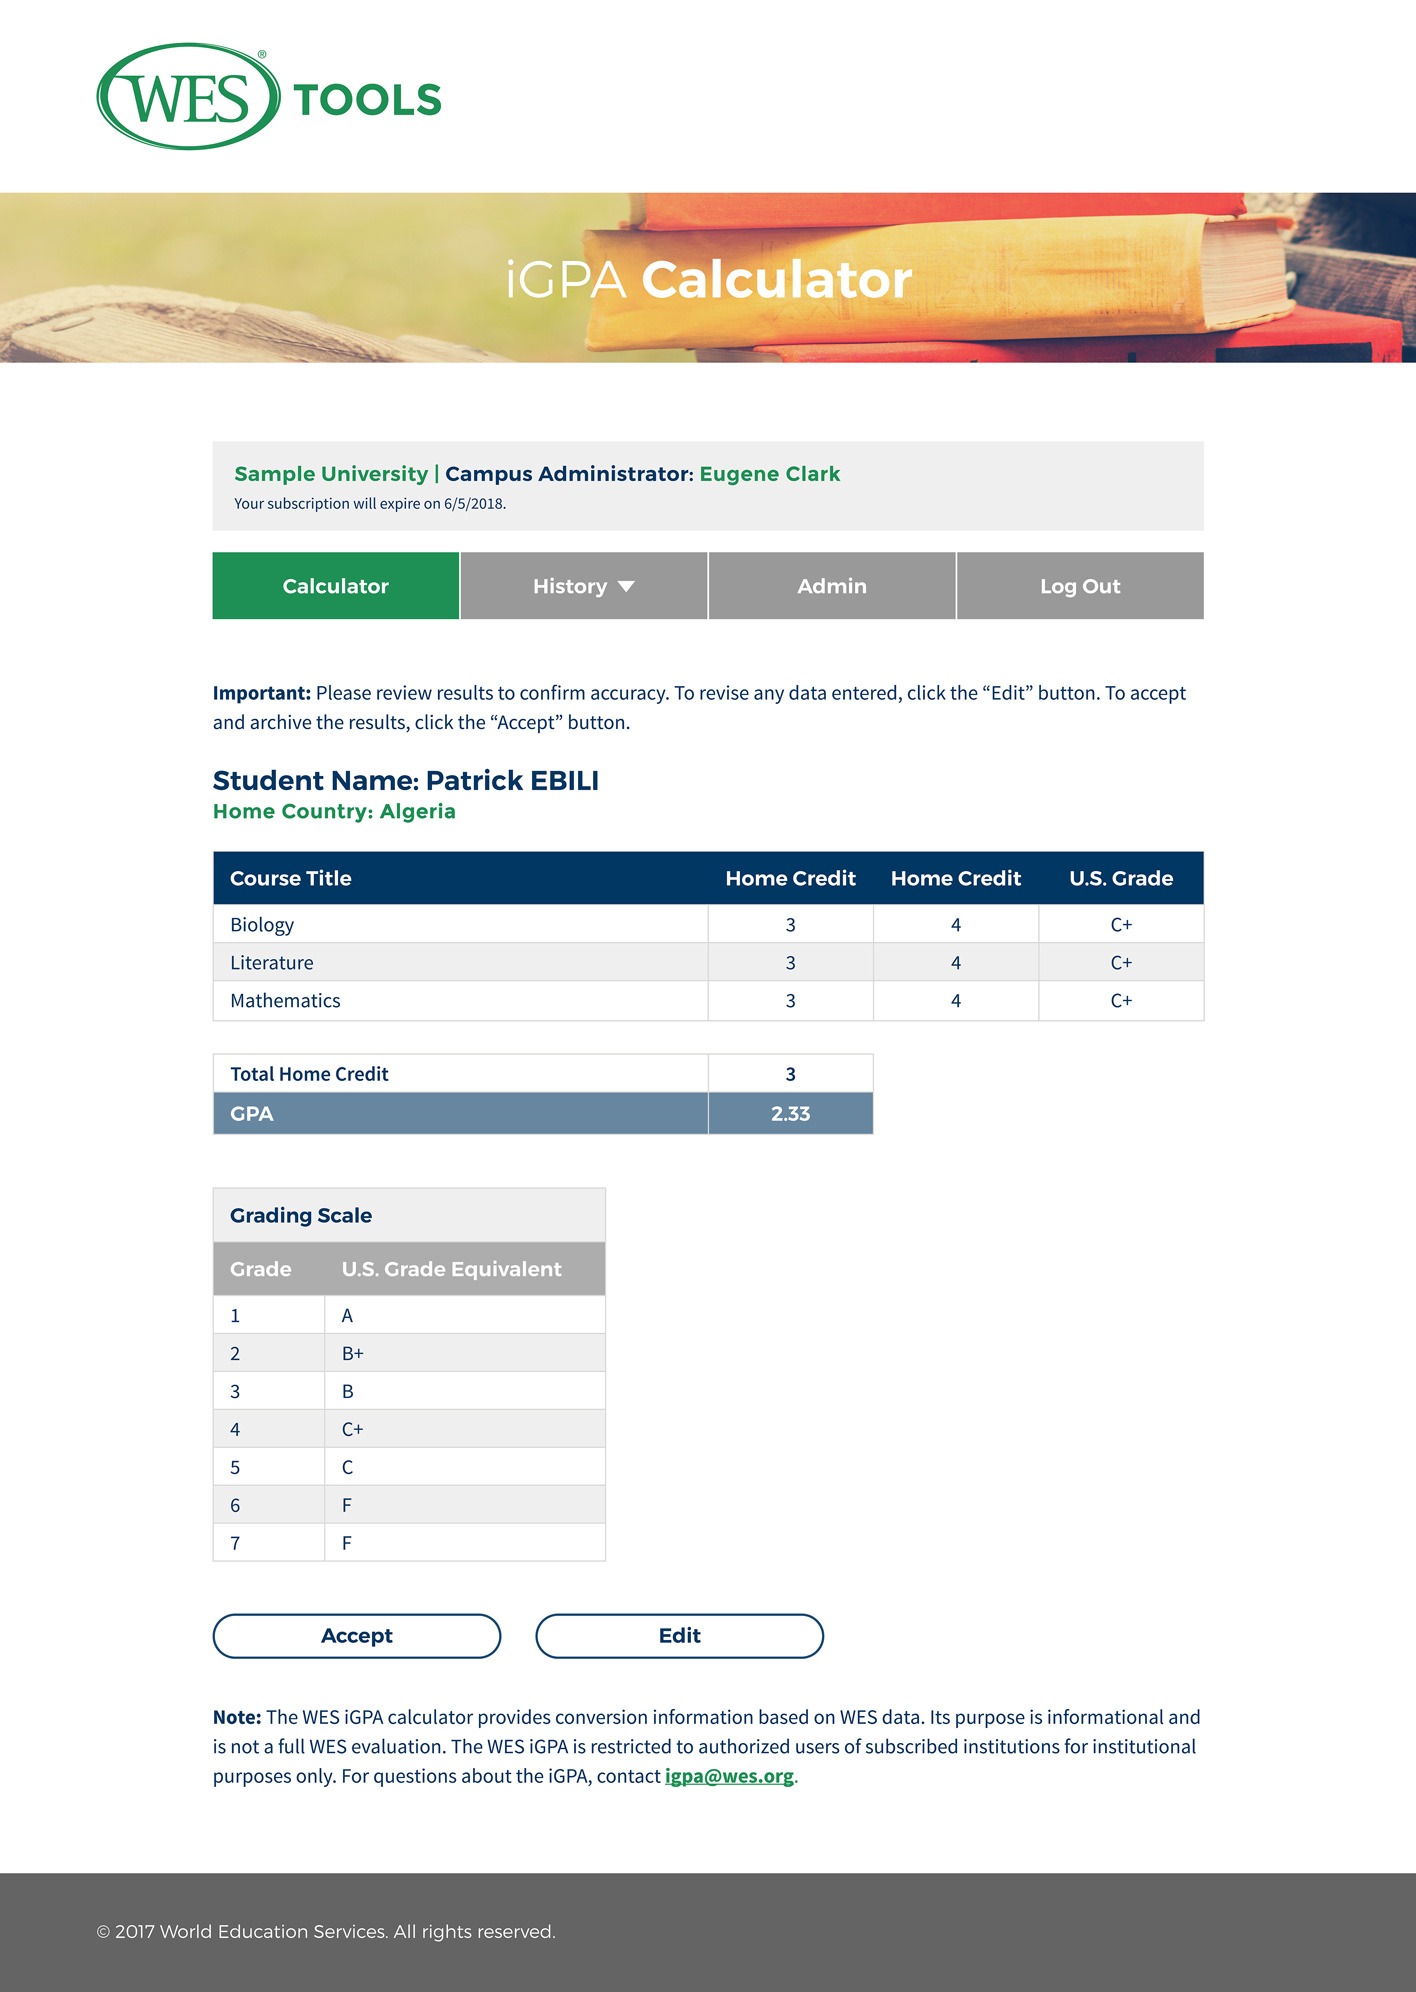 Design for the results page of World Education Services' iGPA calendar. Includes nav for calculator, history, admin, and logout; student's list of courses, credits, home grades, and U.S. equivalent grades; and grading scale.